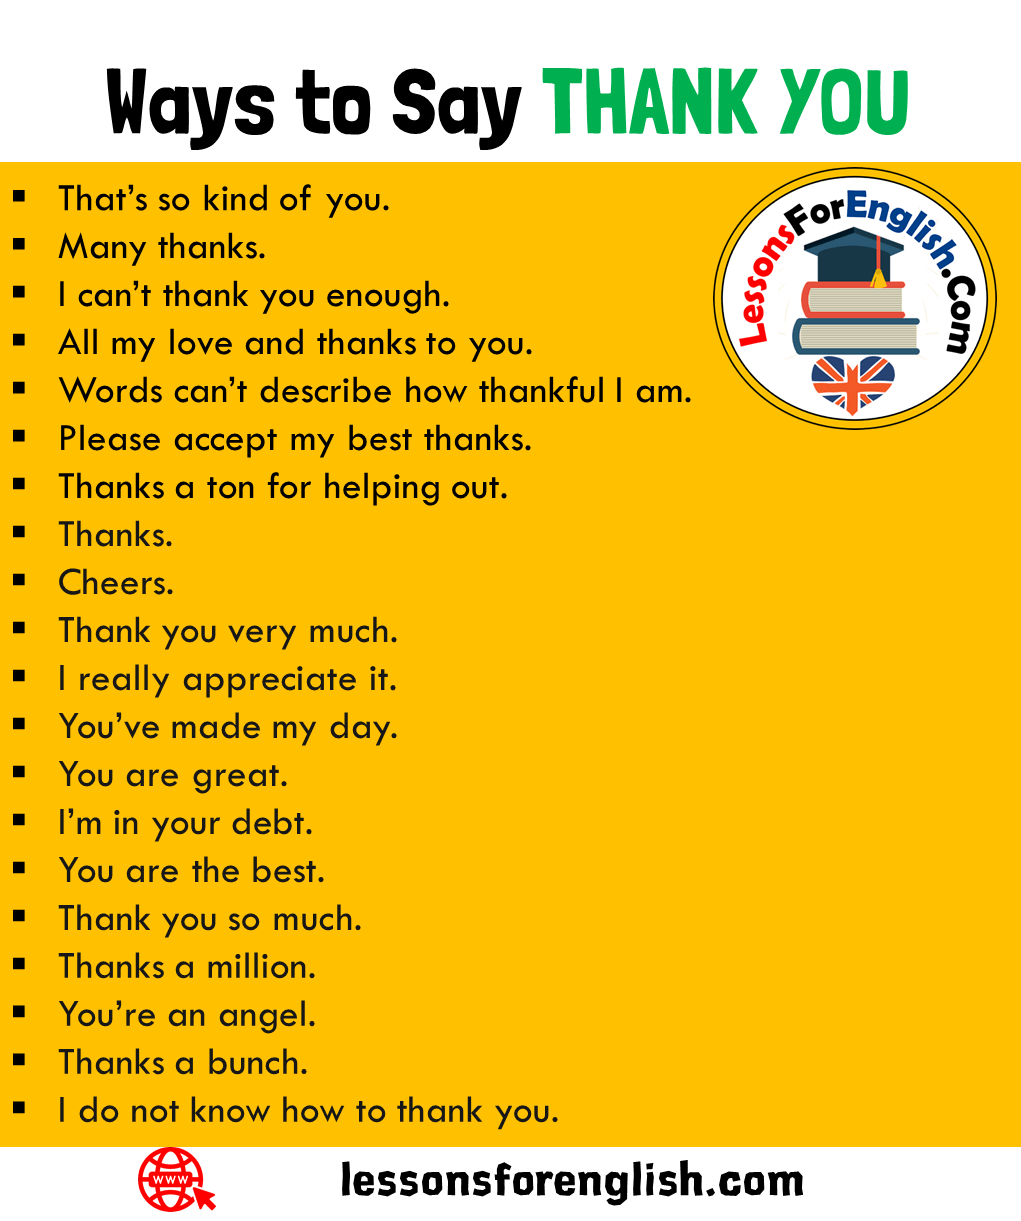 How to say thank you in other words